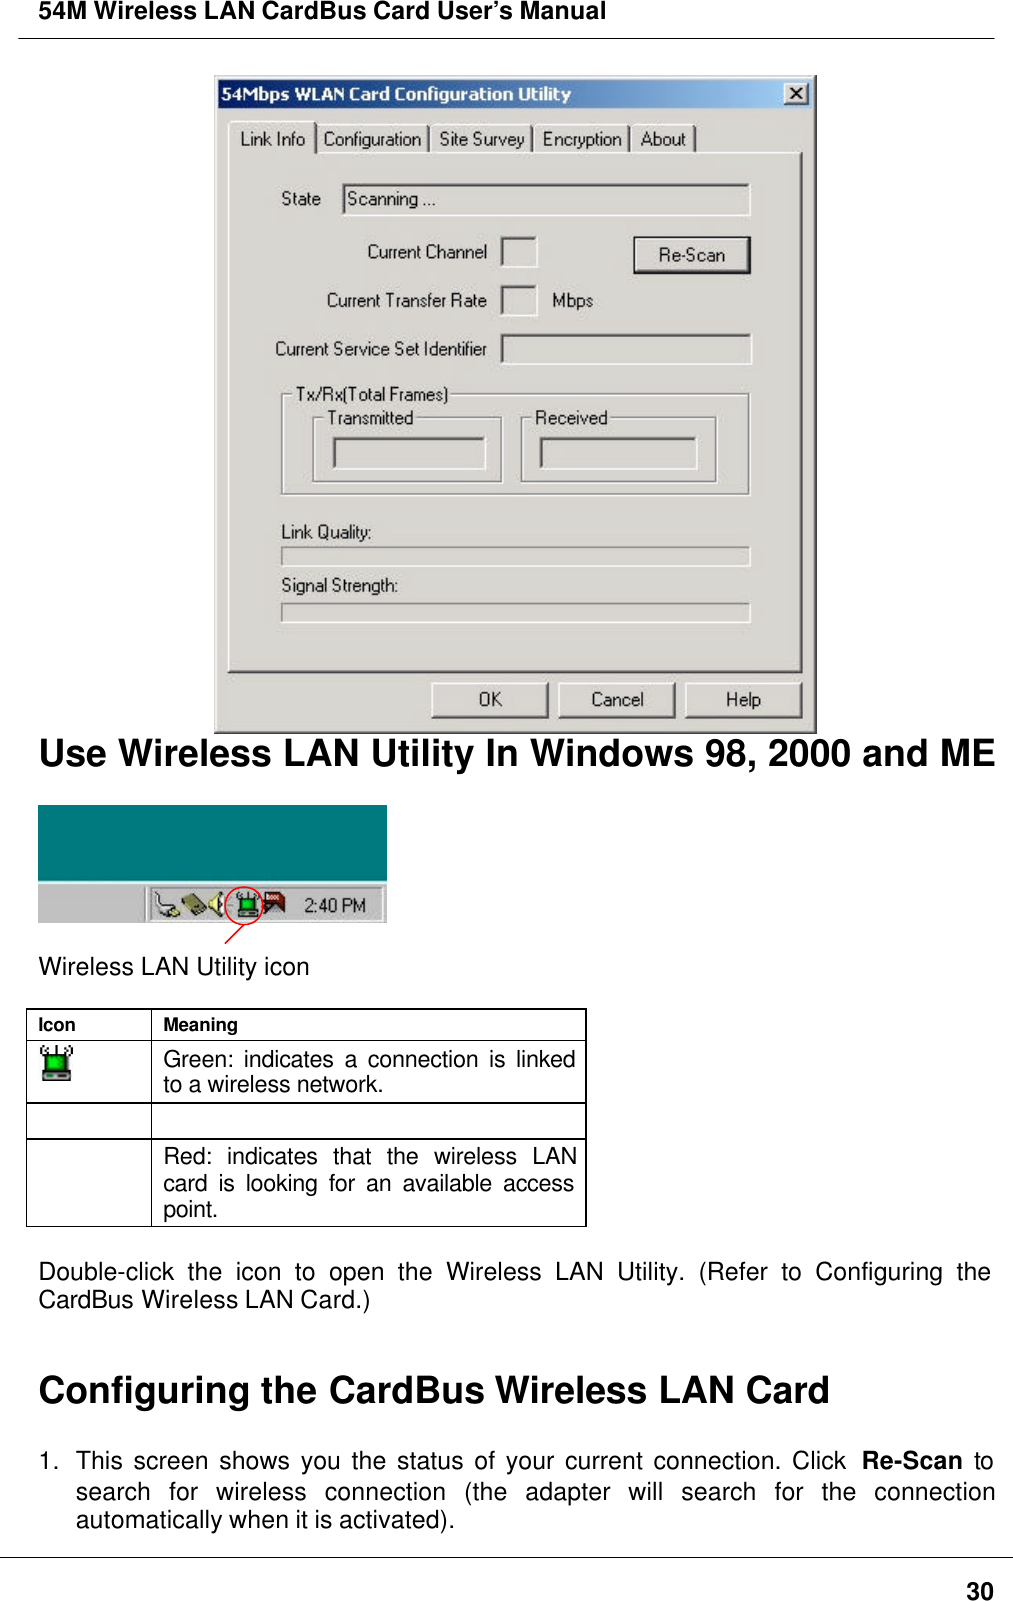 54M Wireless LAN CardBus Card User’s Manual30Use Wireless LAN Utility In Windows 98, 2000 and MEWireless LAN Utility iconIcon MeaningGreen: indicates a connection is linkedto a wireless network.Red: indicates that the wireless LANcard is looking for an available accesspoint.Double-click the icon to open the Wireless LAN Utility. (Refer to Configuring theCardBus Wireless LAN Card.)Configuring the CardBus Wireless LAN Card1. This screen shows you the status of your current connection. Click  Re-Scan tosearch for wireless connection (the adapter will search for the connectionautomatically when it is activated).